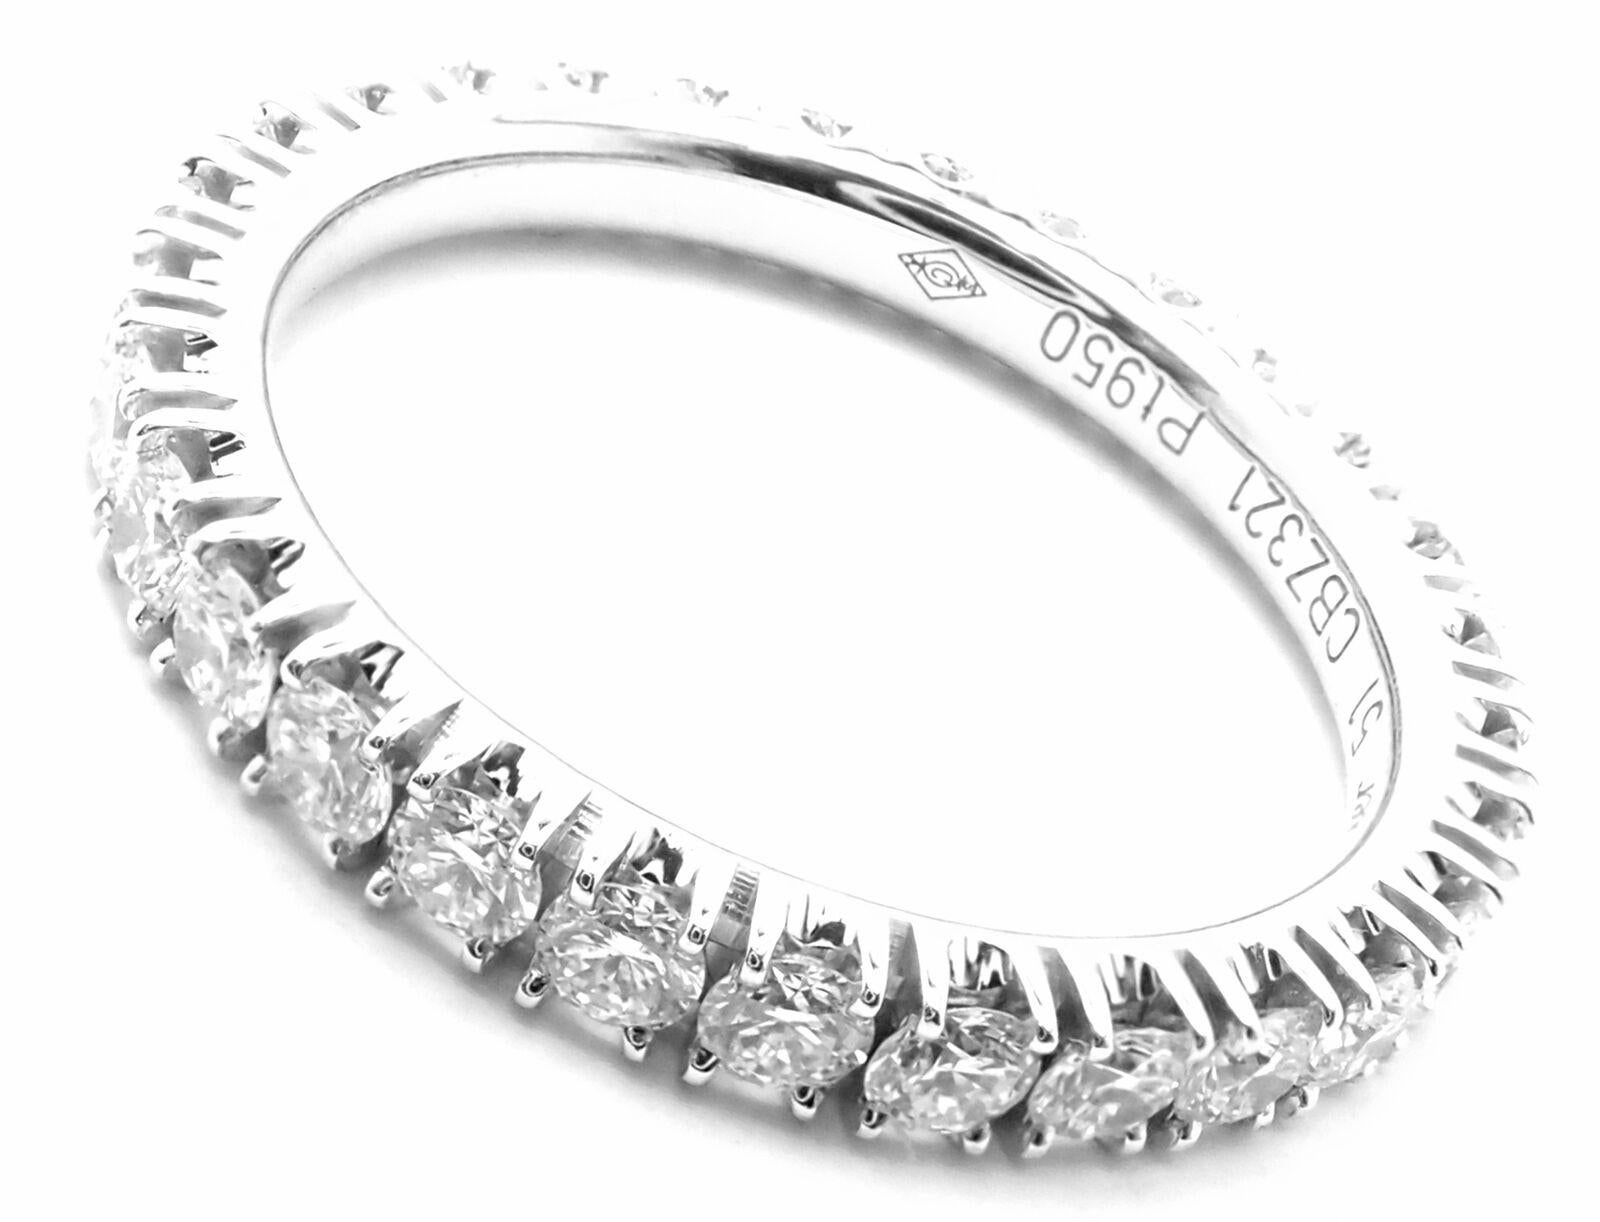 Platinum Diamond Étincelle De Cartier Eternity Band Ring by Cartier.
With 29 round brilliant cut diamonds VVS1 clarity, E color total weight approximately 0.94ct 
Details:
Size: European 51, US 5.75
Weight: 3.2 grams
Width: 2.6mm
Stamped Hallmarks: